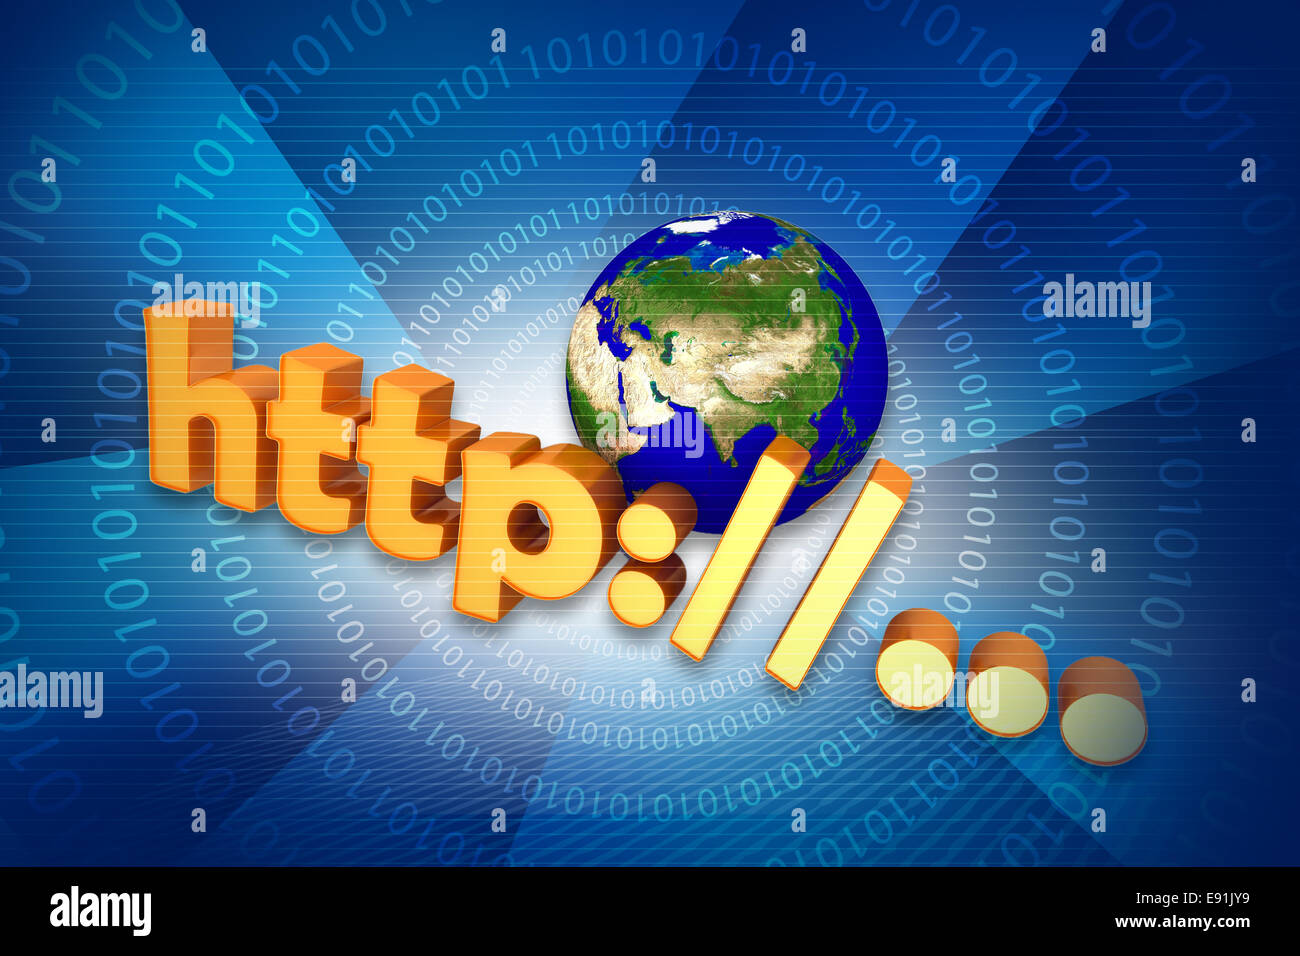 world and http Stock Photo